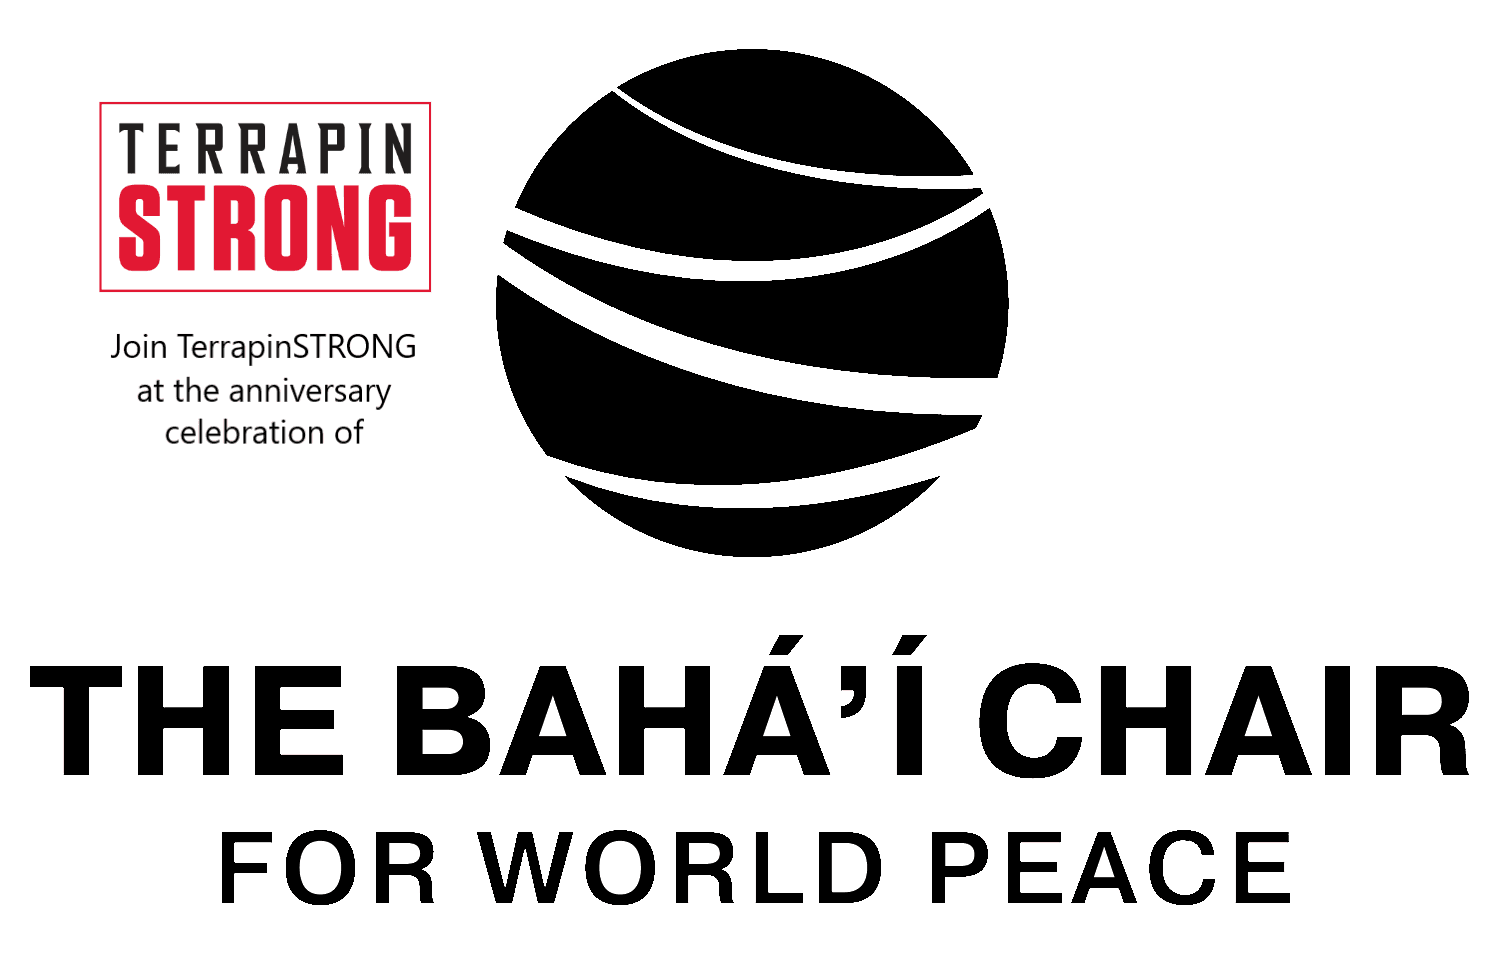 TerrapinSTRONG logo - Join us at the anniversary celebration of "The Baha'i Chair for World Peace" logo (an abstract globe icon over text).